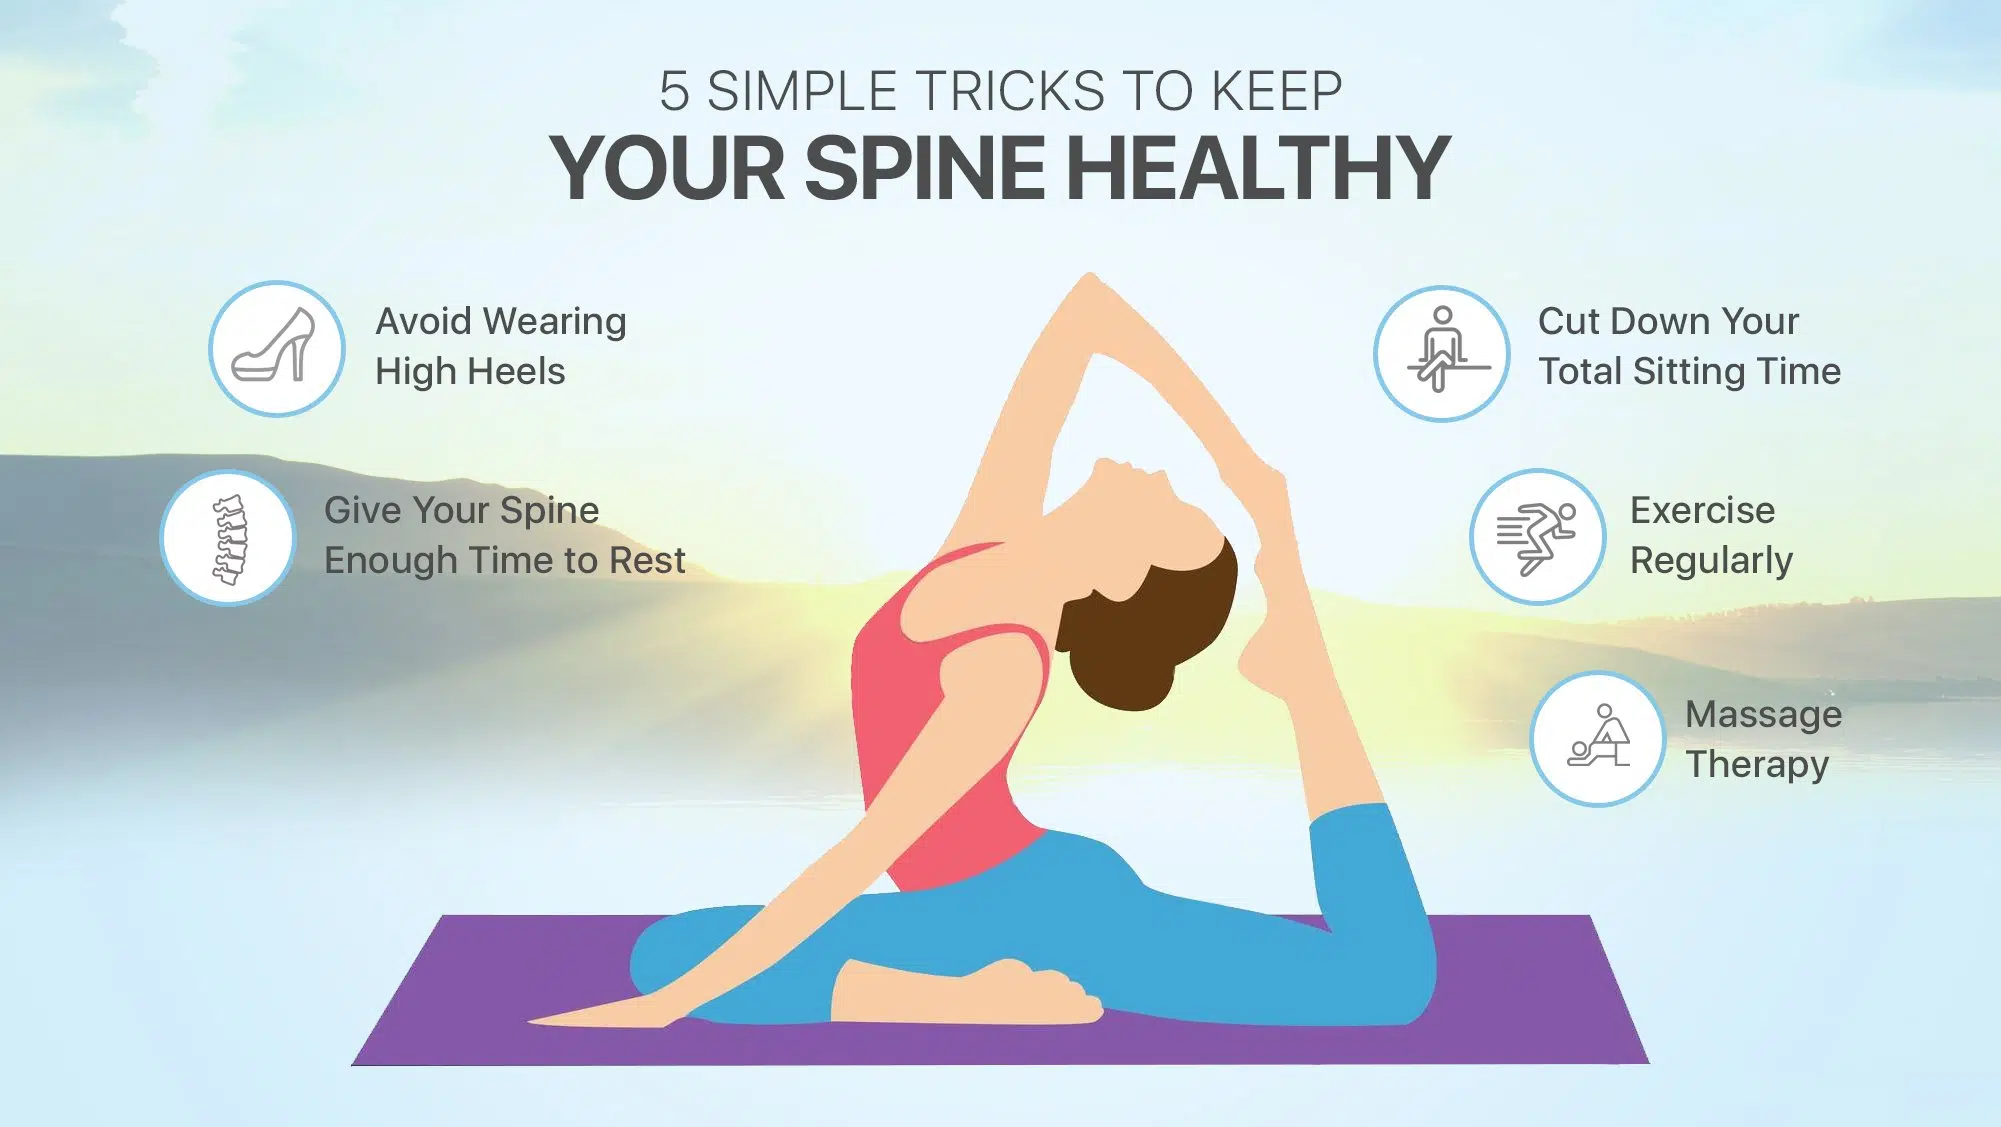 Maintain Your Spine Health With These Helpful Tips